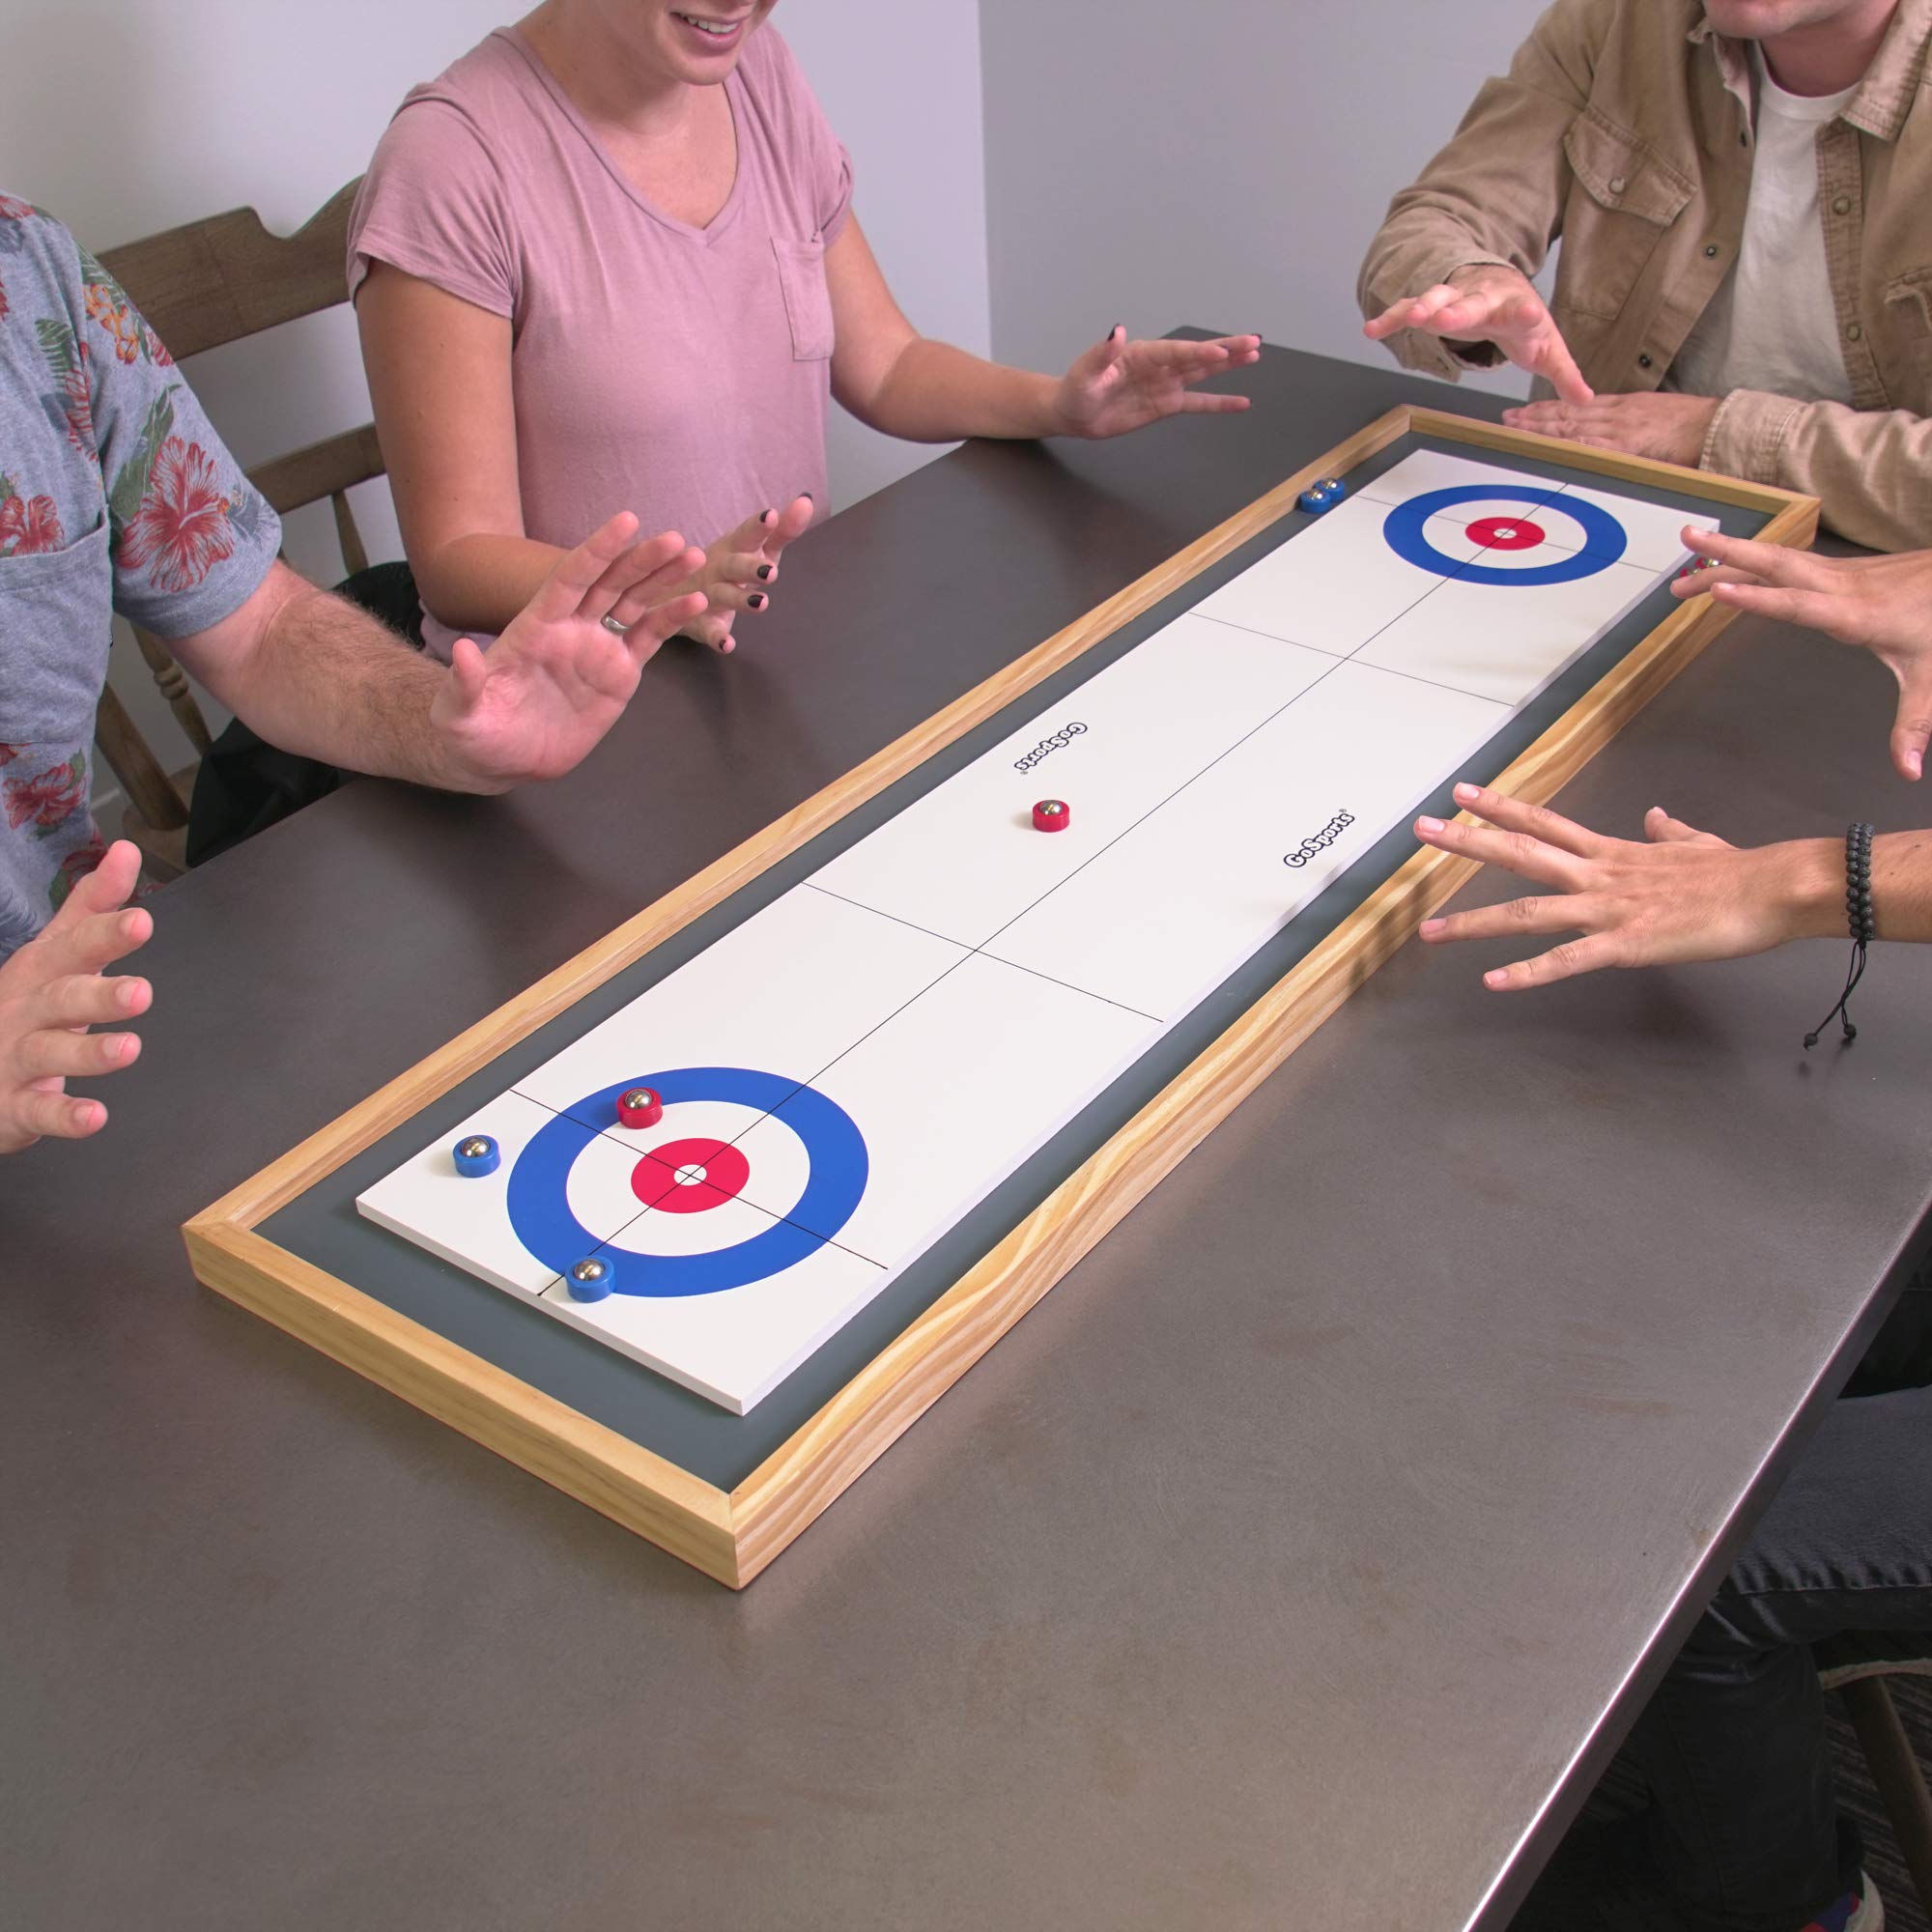 GoSports Shuffleboard and Curling 2 in 1 Board Games - Classic Tabletop or Giant Size - Choose Your Style